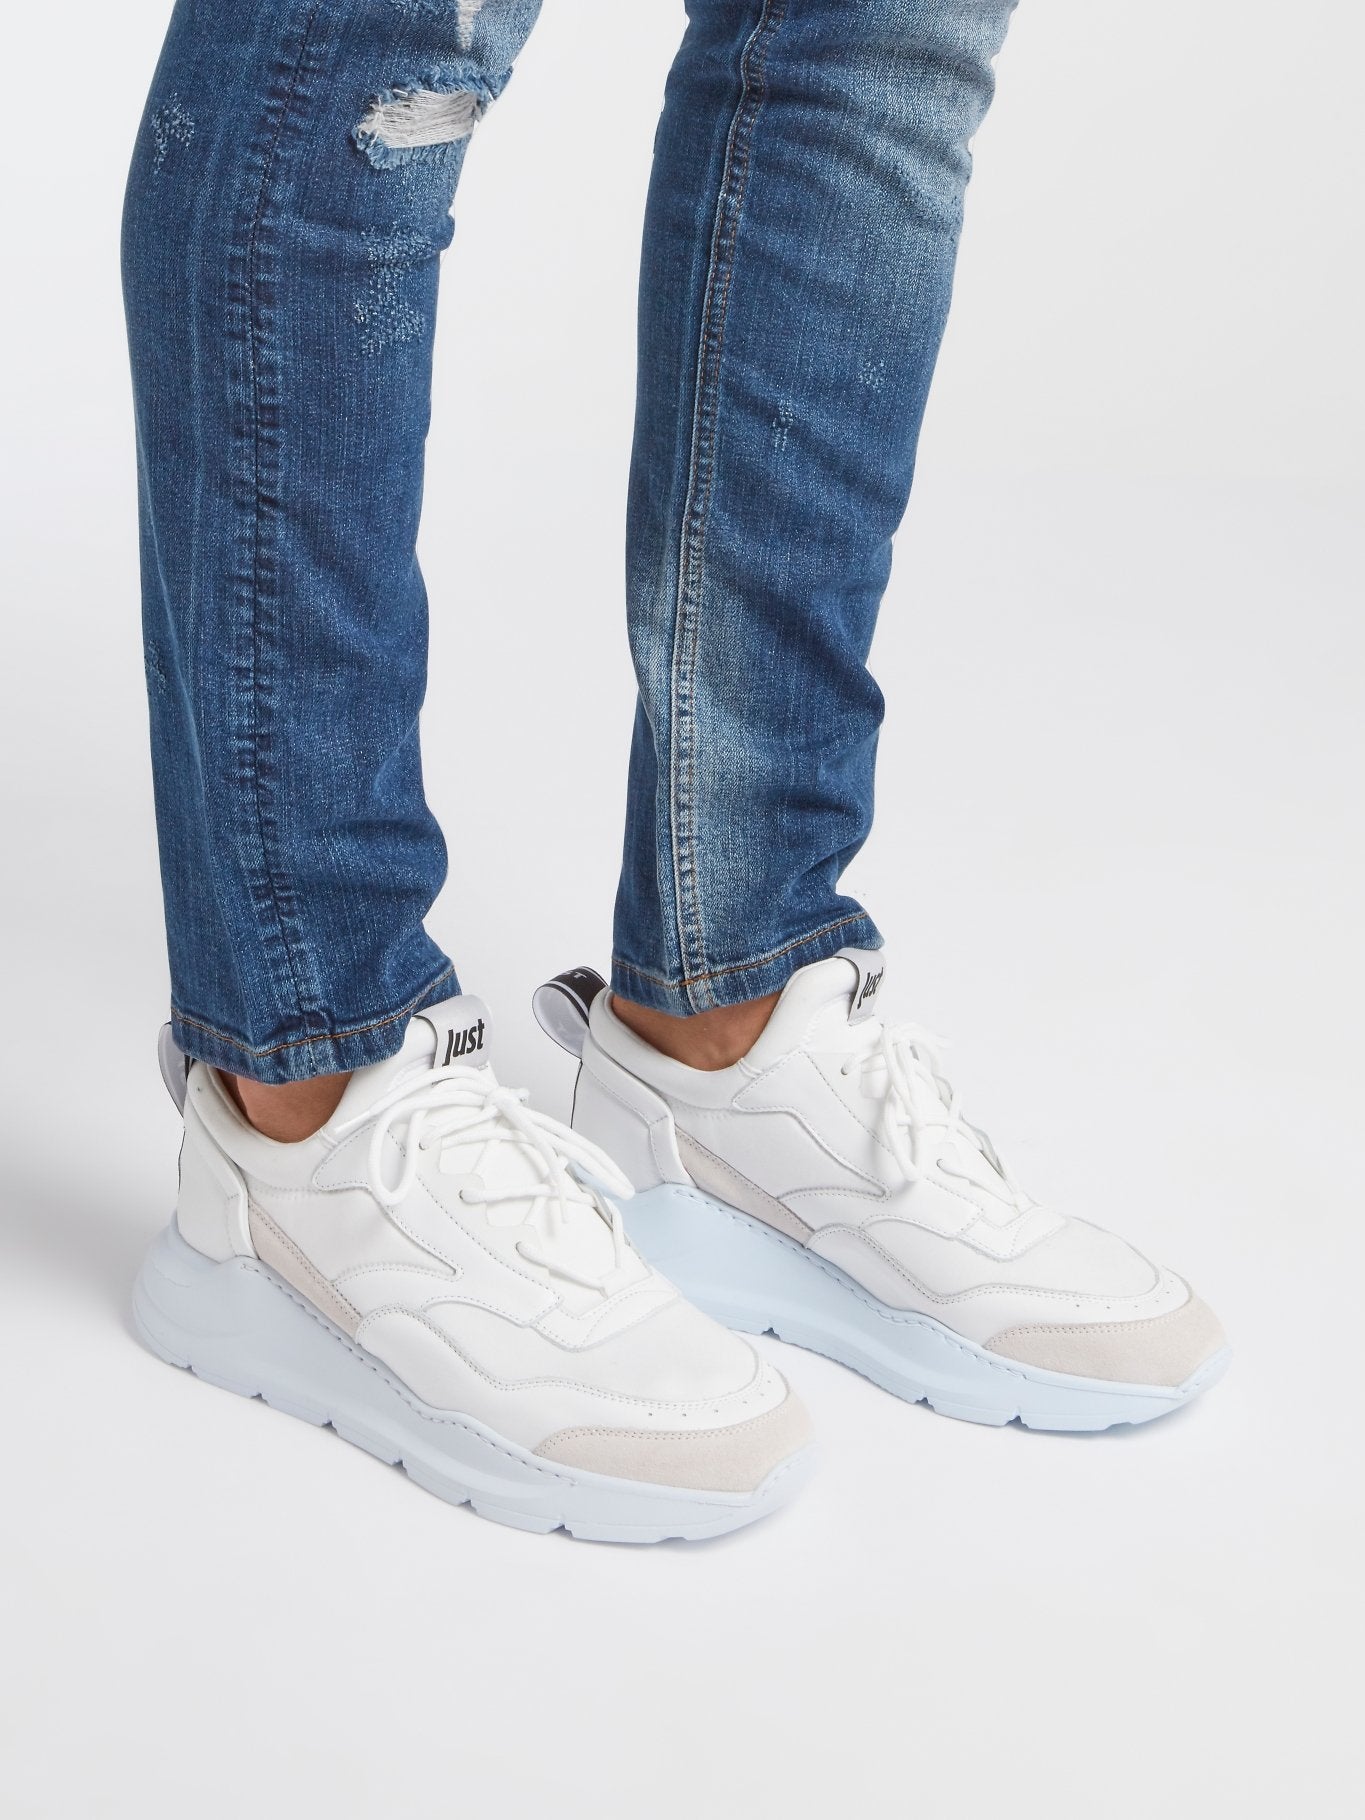 White Lace Up Platform Sneakers